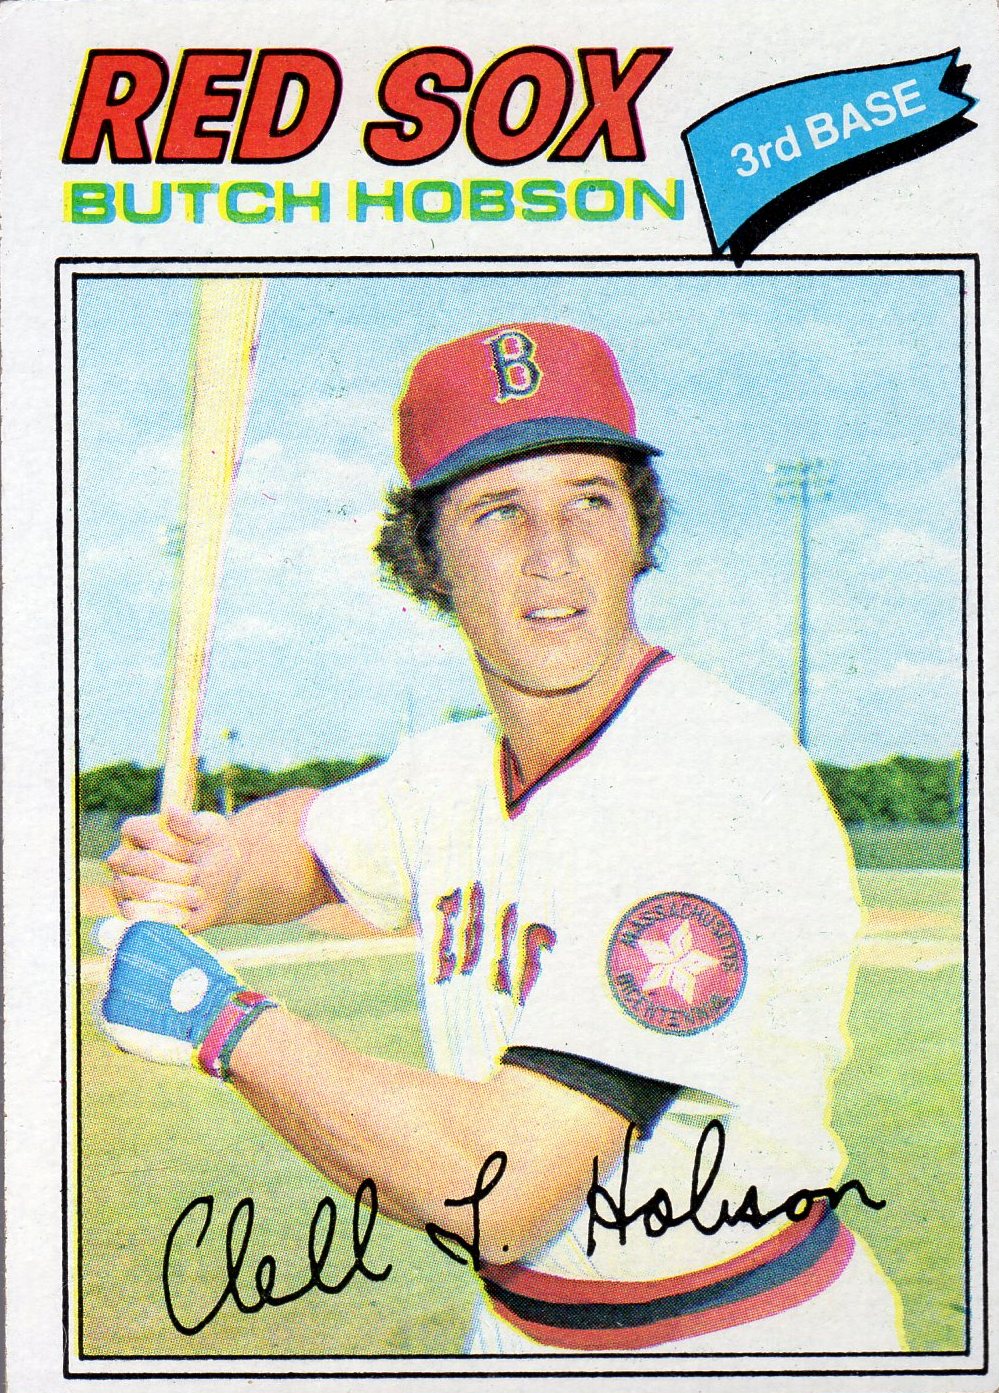  Butch Hobson player image